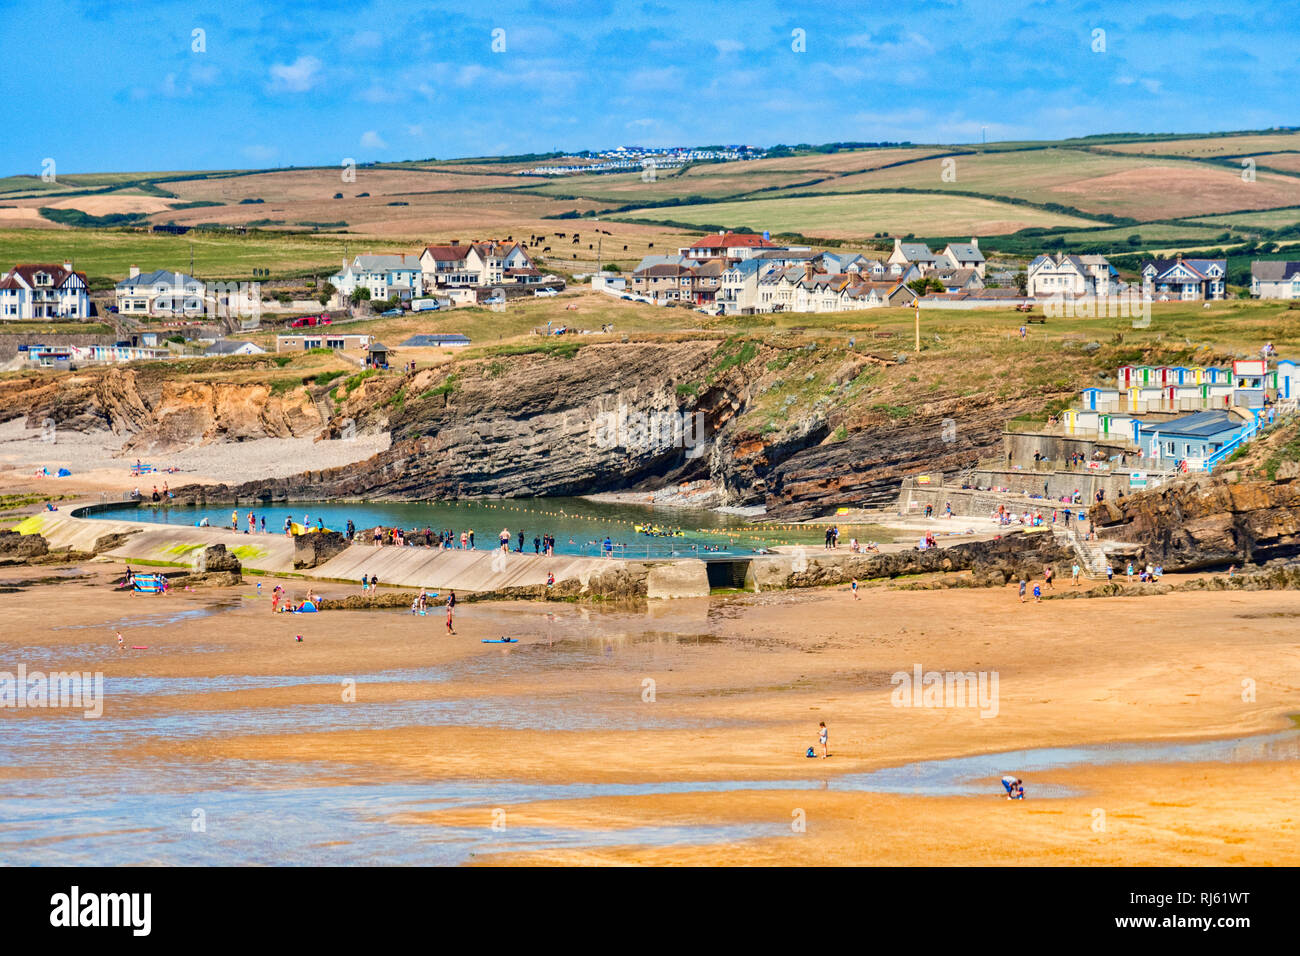 6 July 2018: Bude, Cornwall, UK - The beach and tidal swimming pool, with the town and hills beyond, during the summer heatwave. The hills are showing Stock Photo